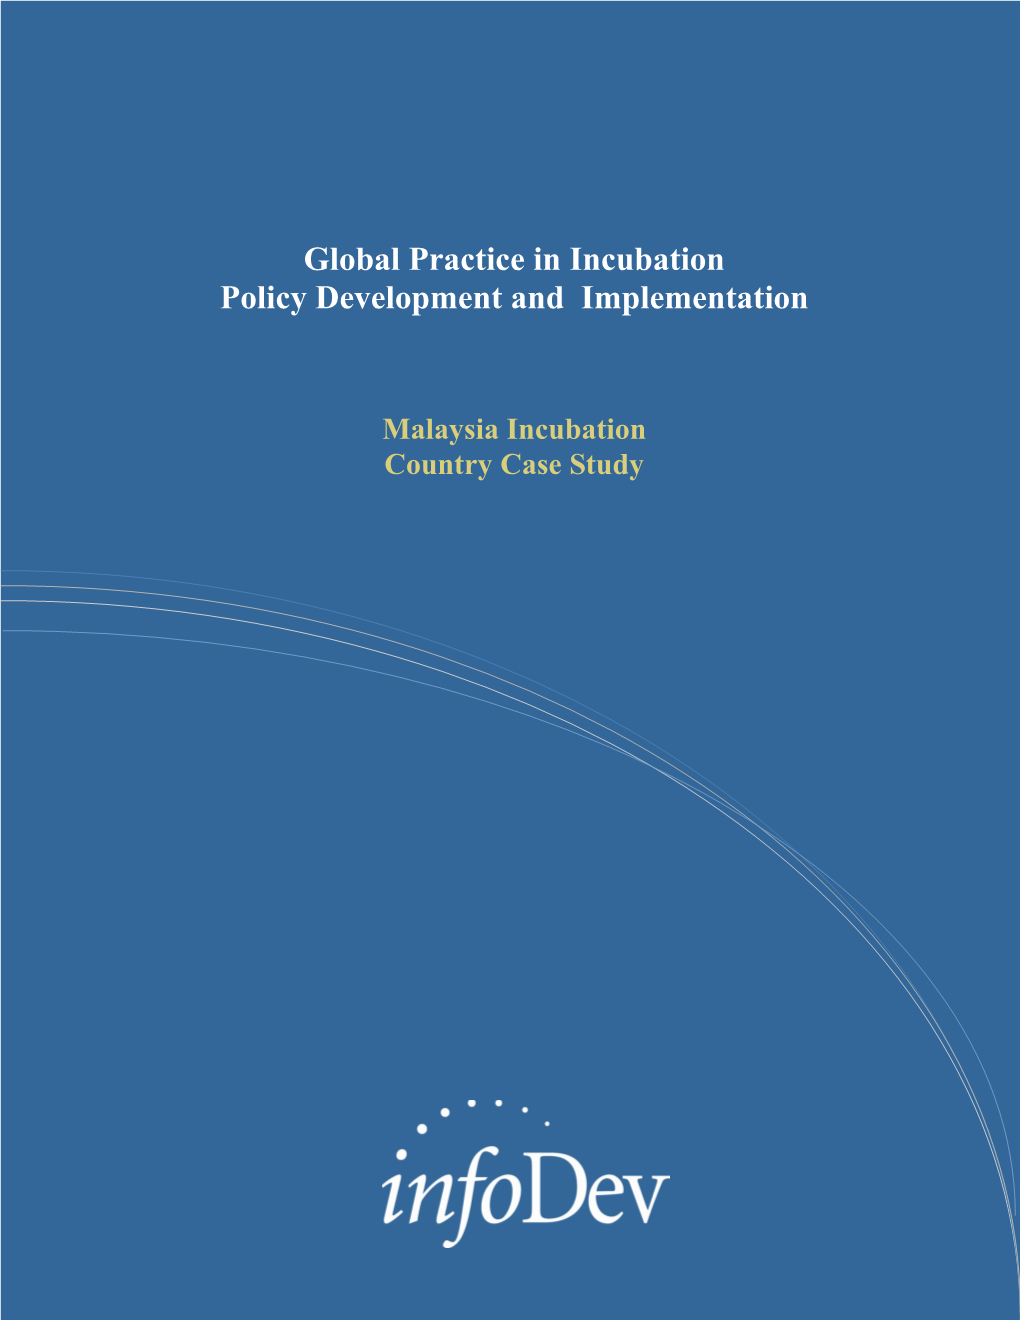 Global Practice in Incubation Policy Development and Implementation